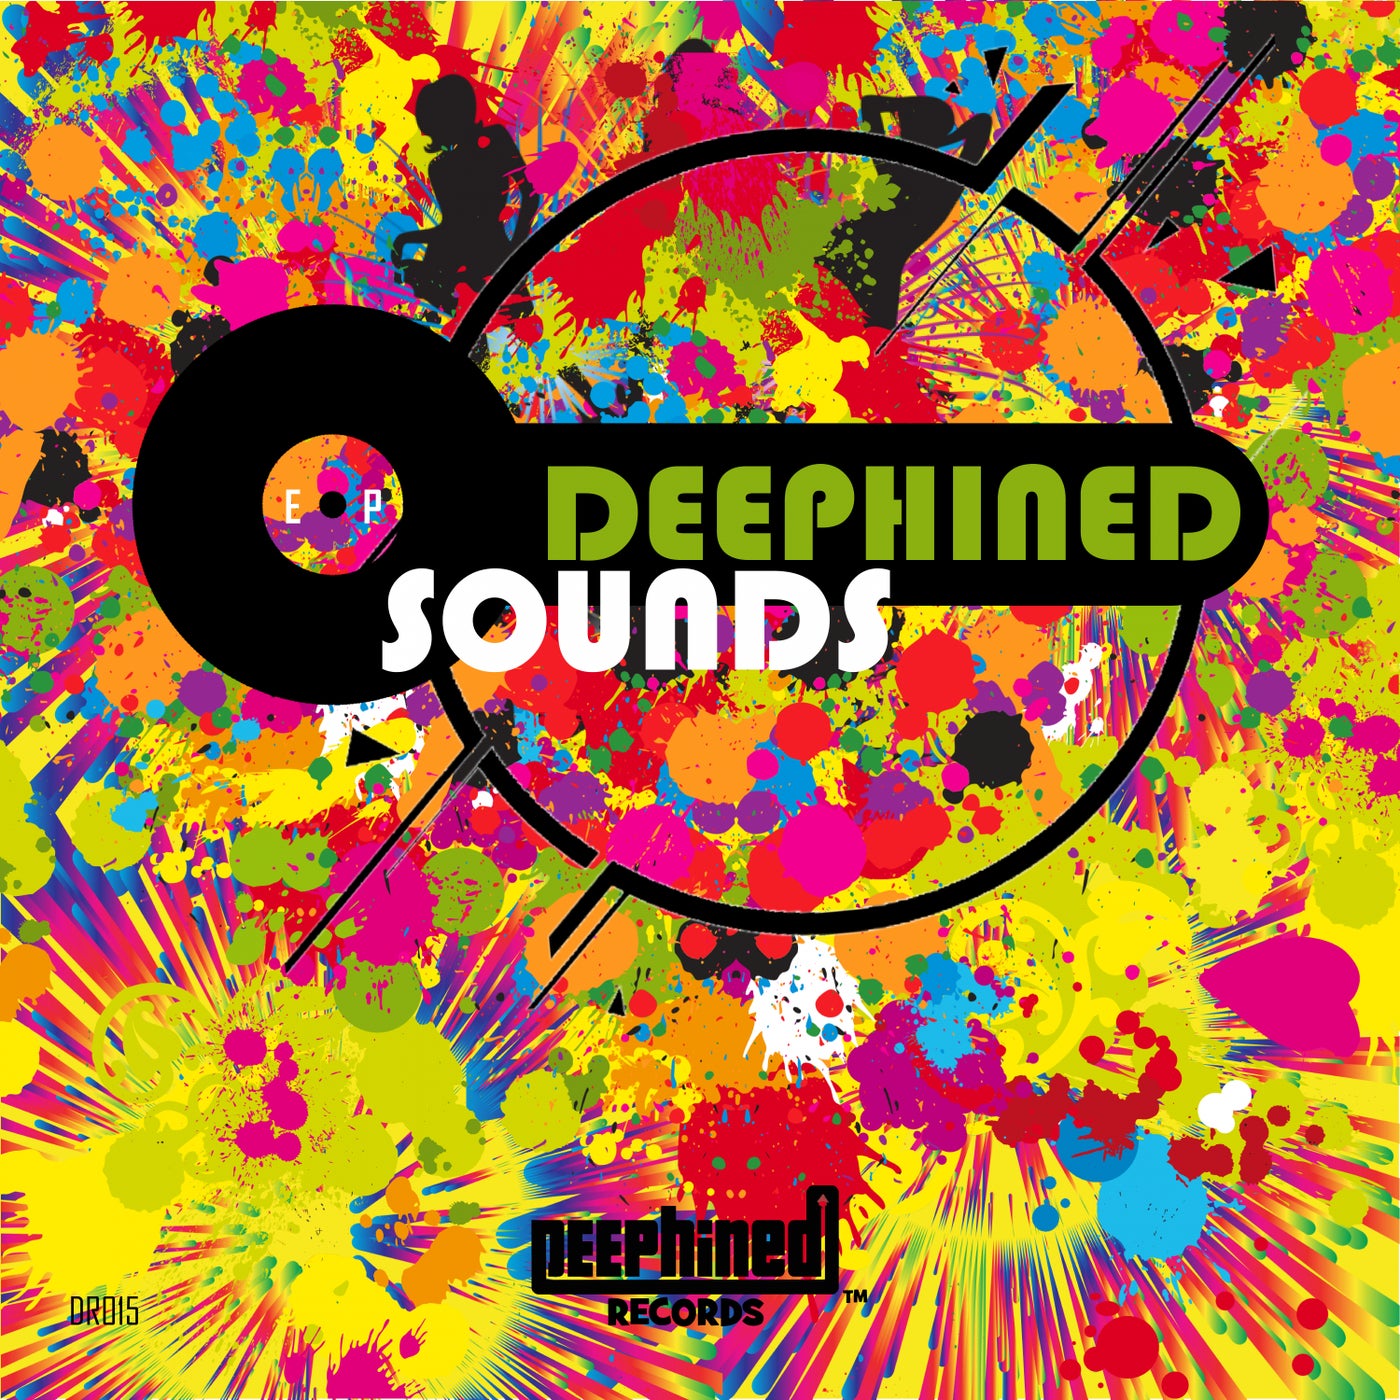 Deephined Sounds